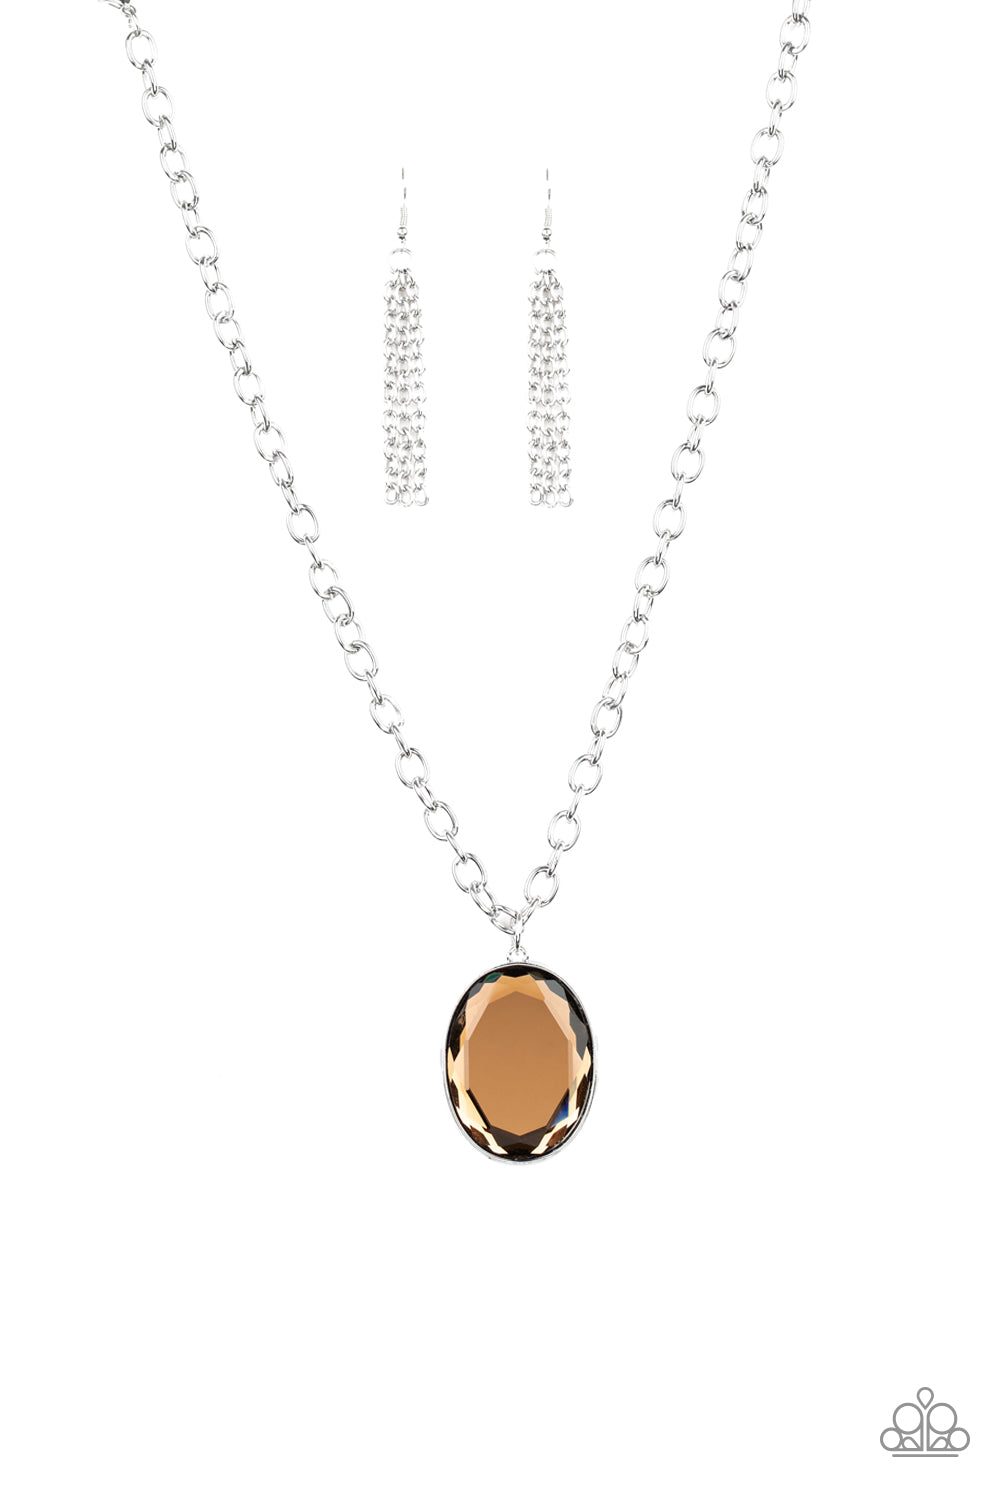 Paparazzi Accessories Light As HEIR - Brown Necklace & Earrings